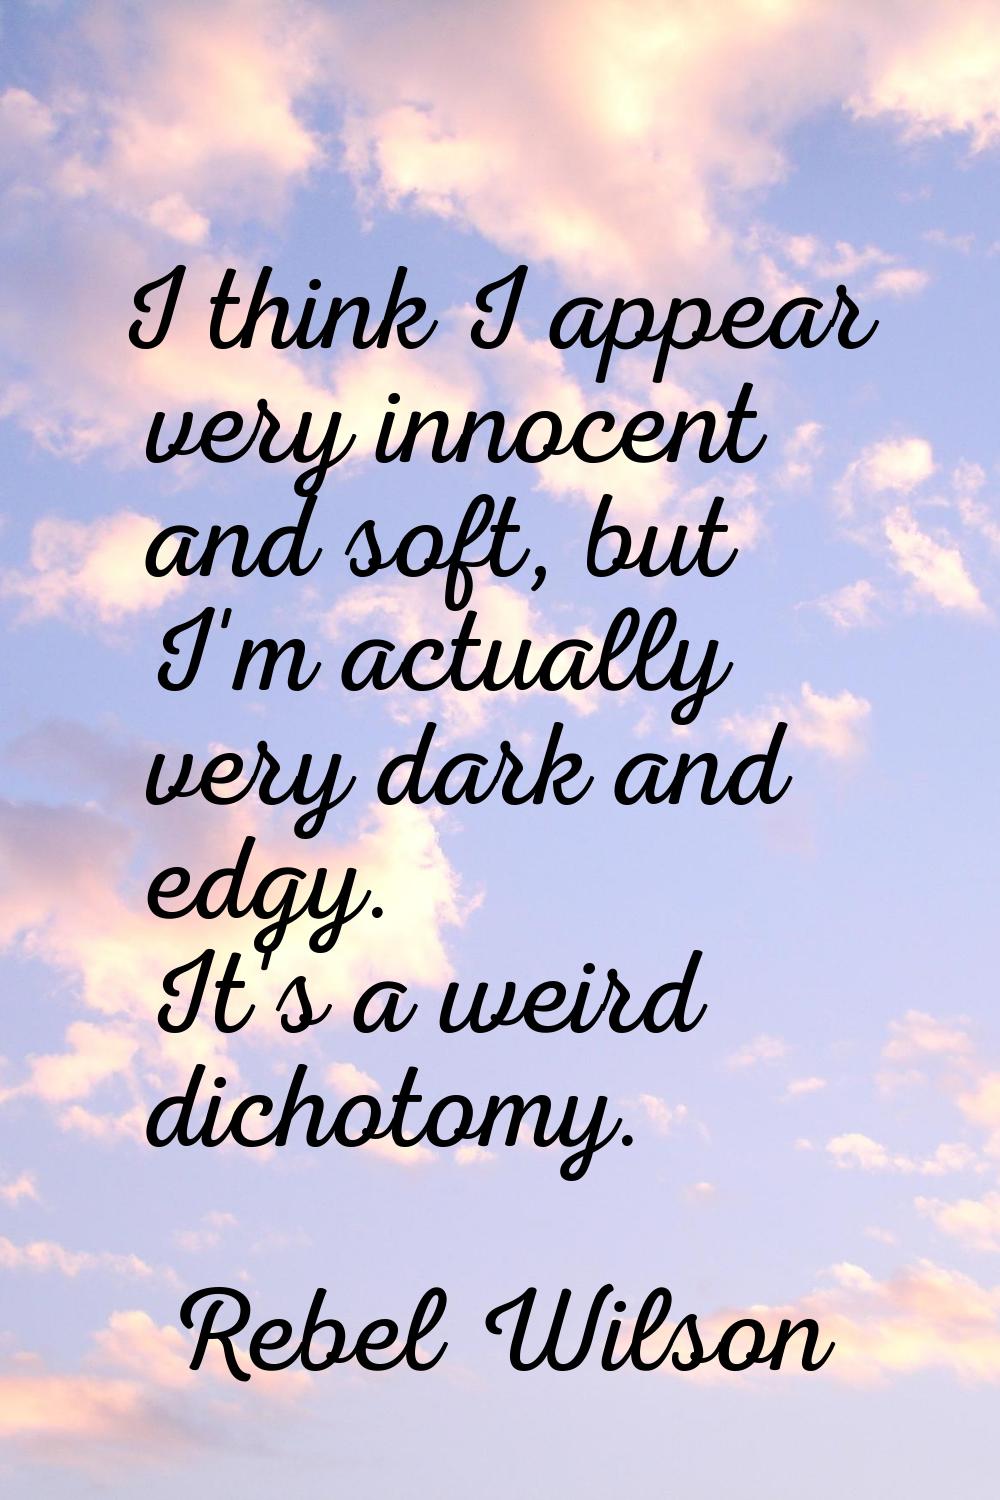 I think I appear very innocent and soft, but I'm actually very dark and edgy. It's a weird dichotom